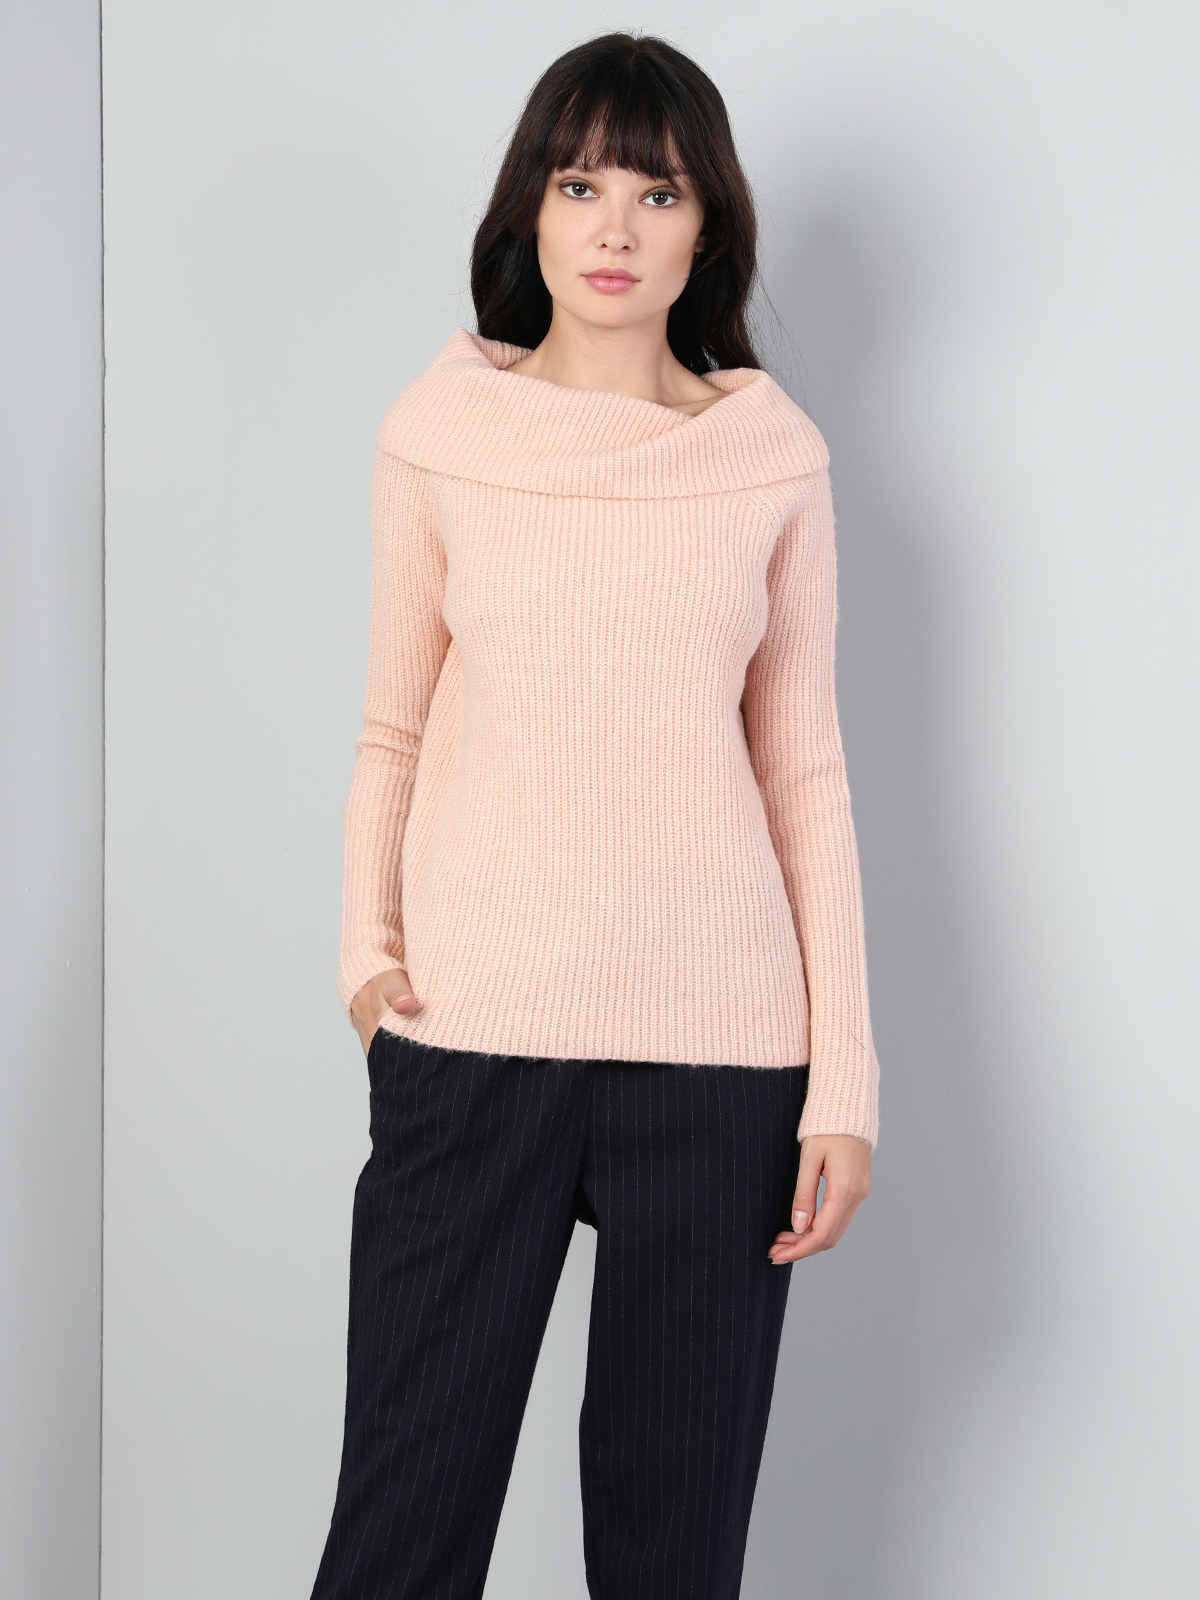 Colins Pınk Woman Sweaters. 4